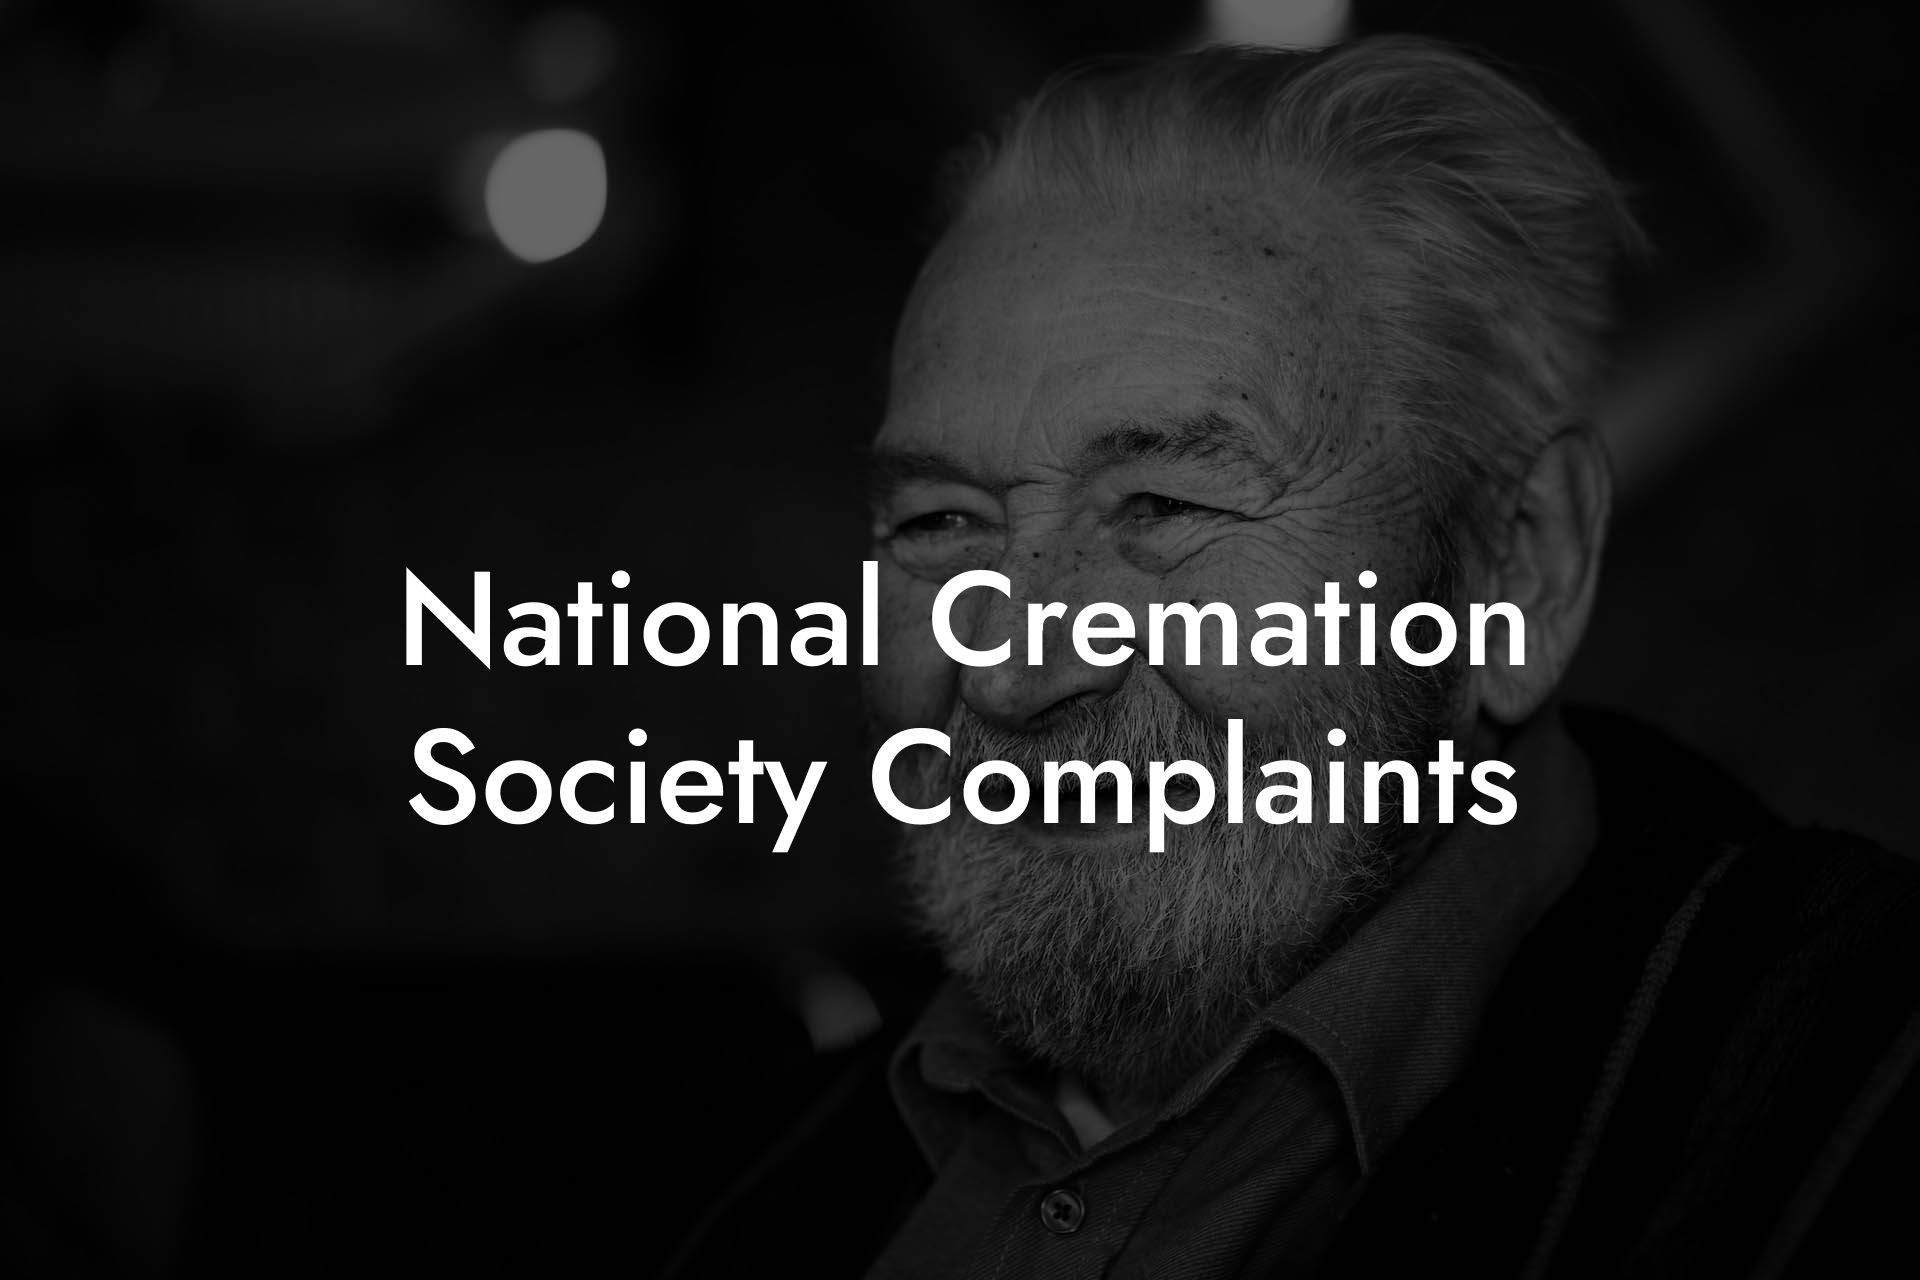 National Cremation Society Complaints